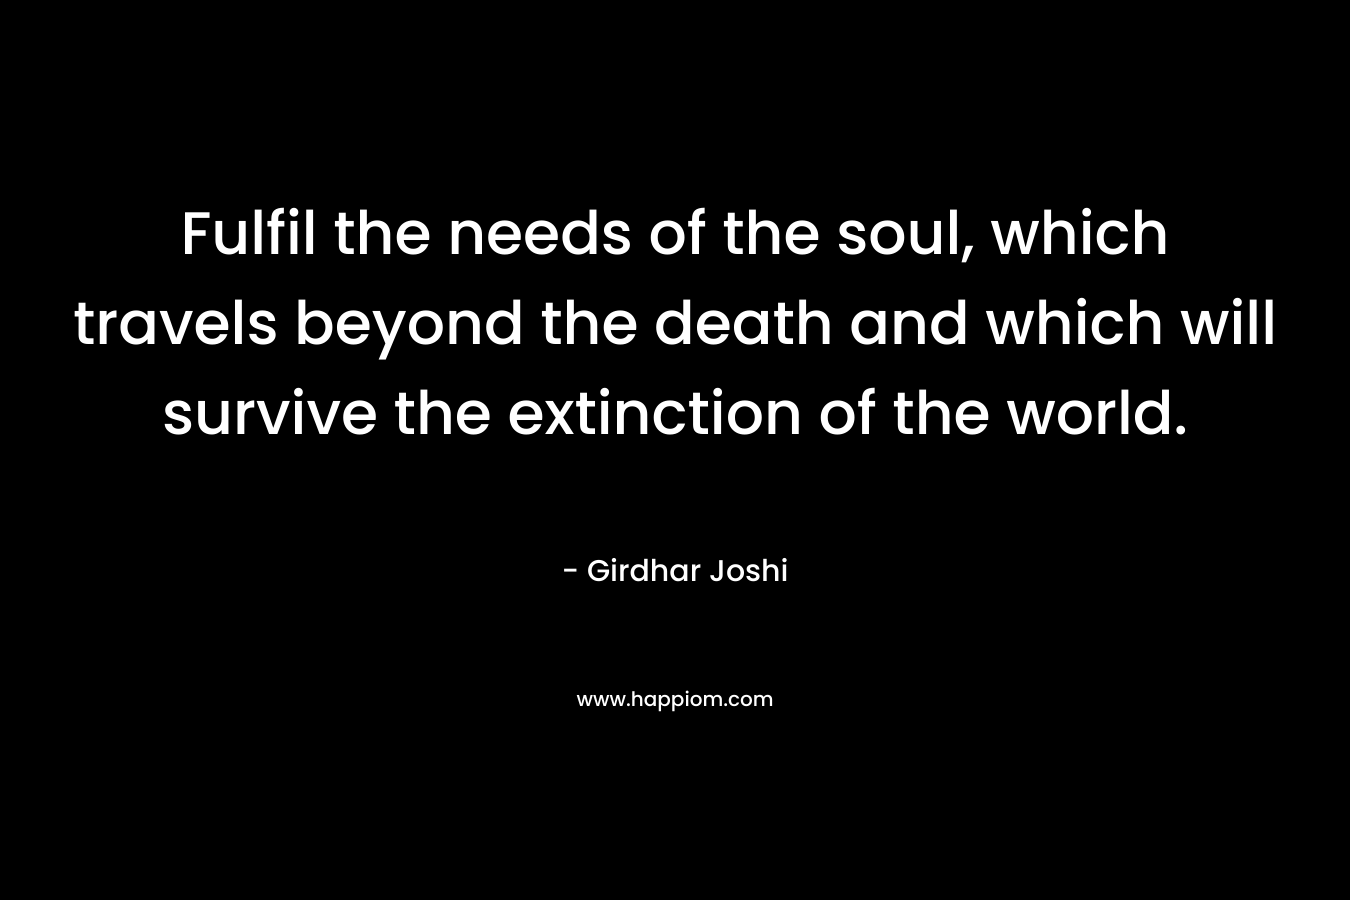 Fulfil the needs of the soul, which travels beyond the death and which will survive the extinction of the world.